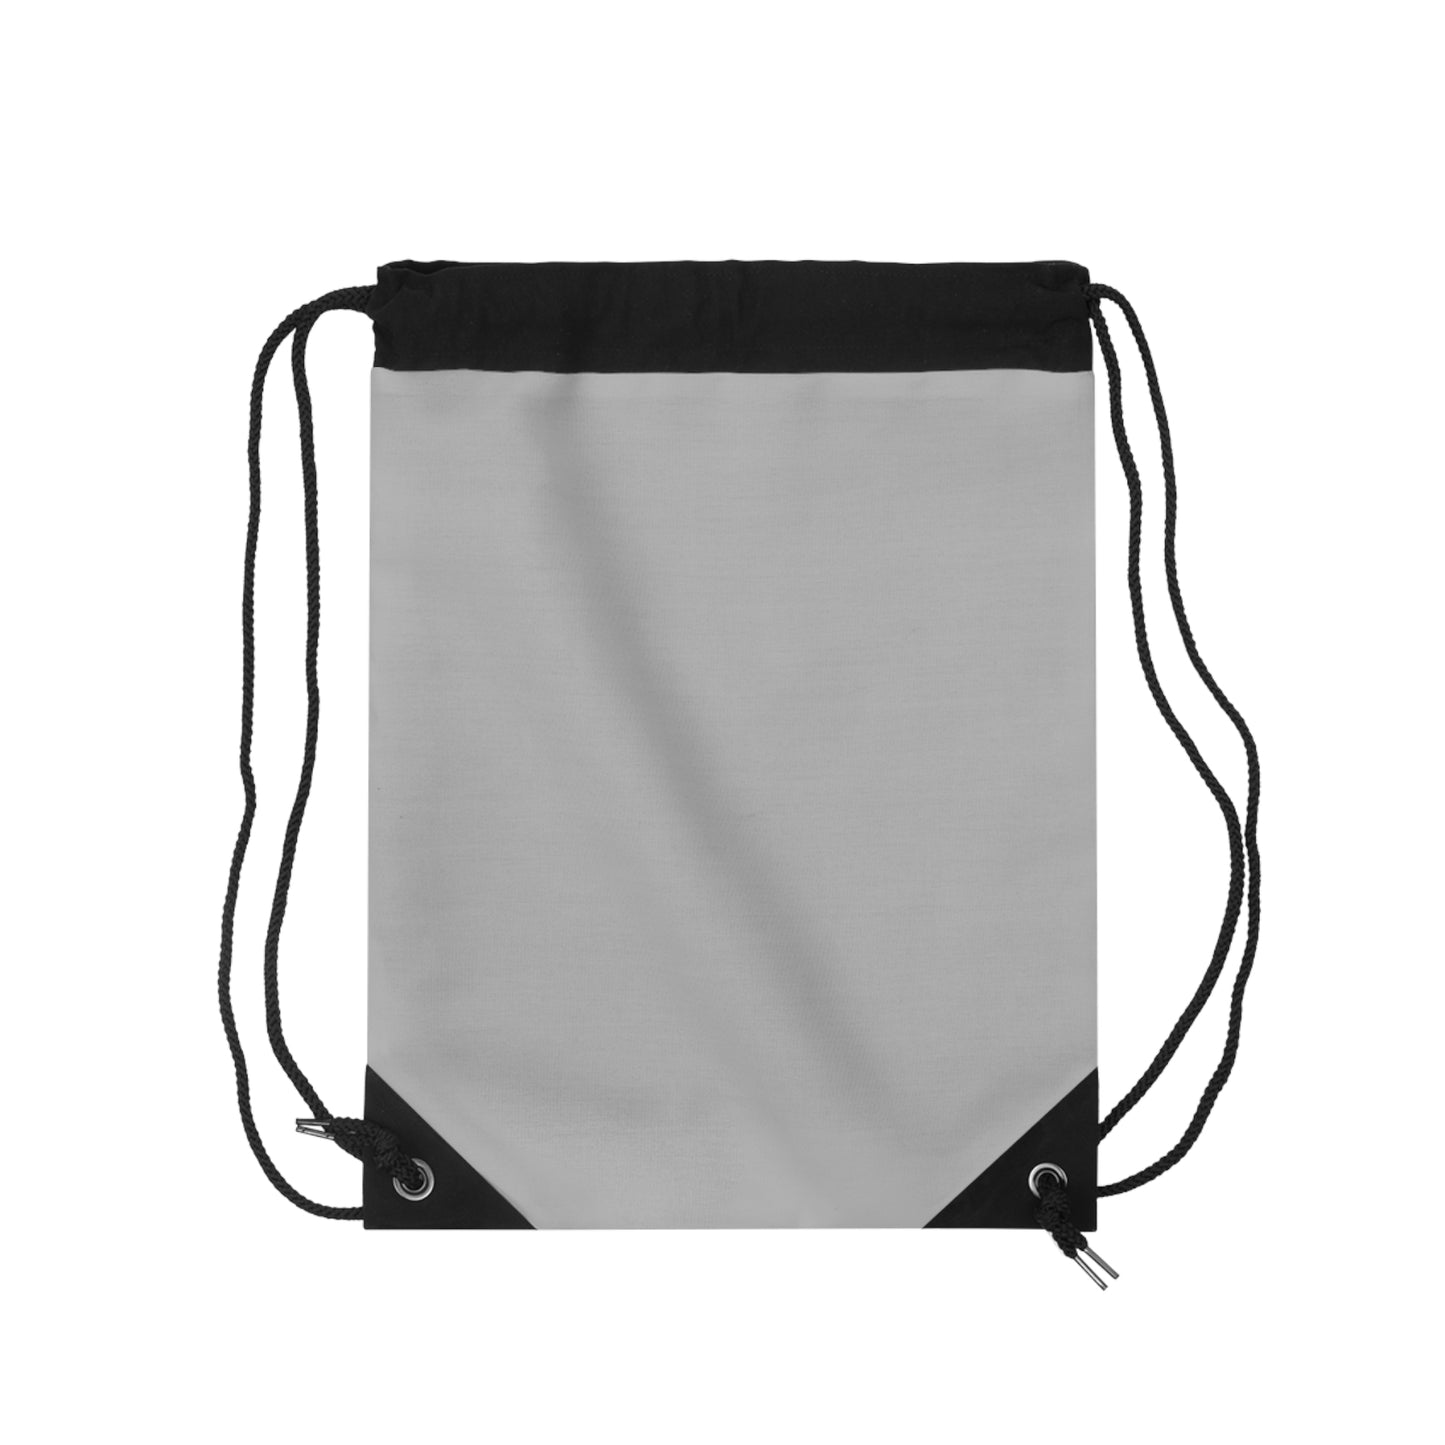 Christ Carried My Burdens So I Could Thrive Drawstring Bag